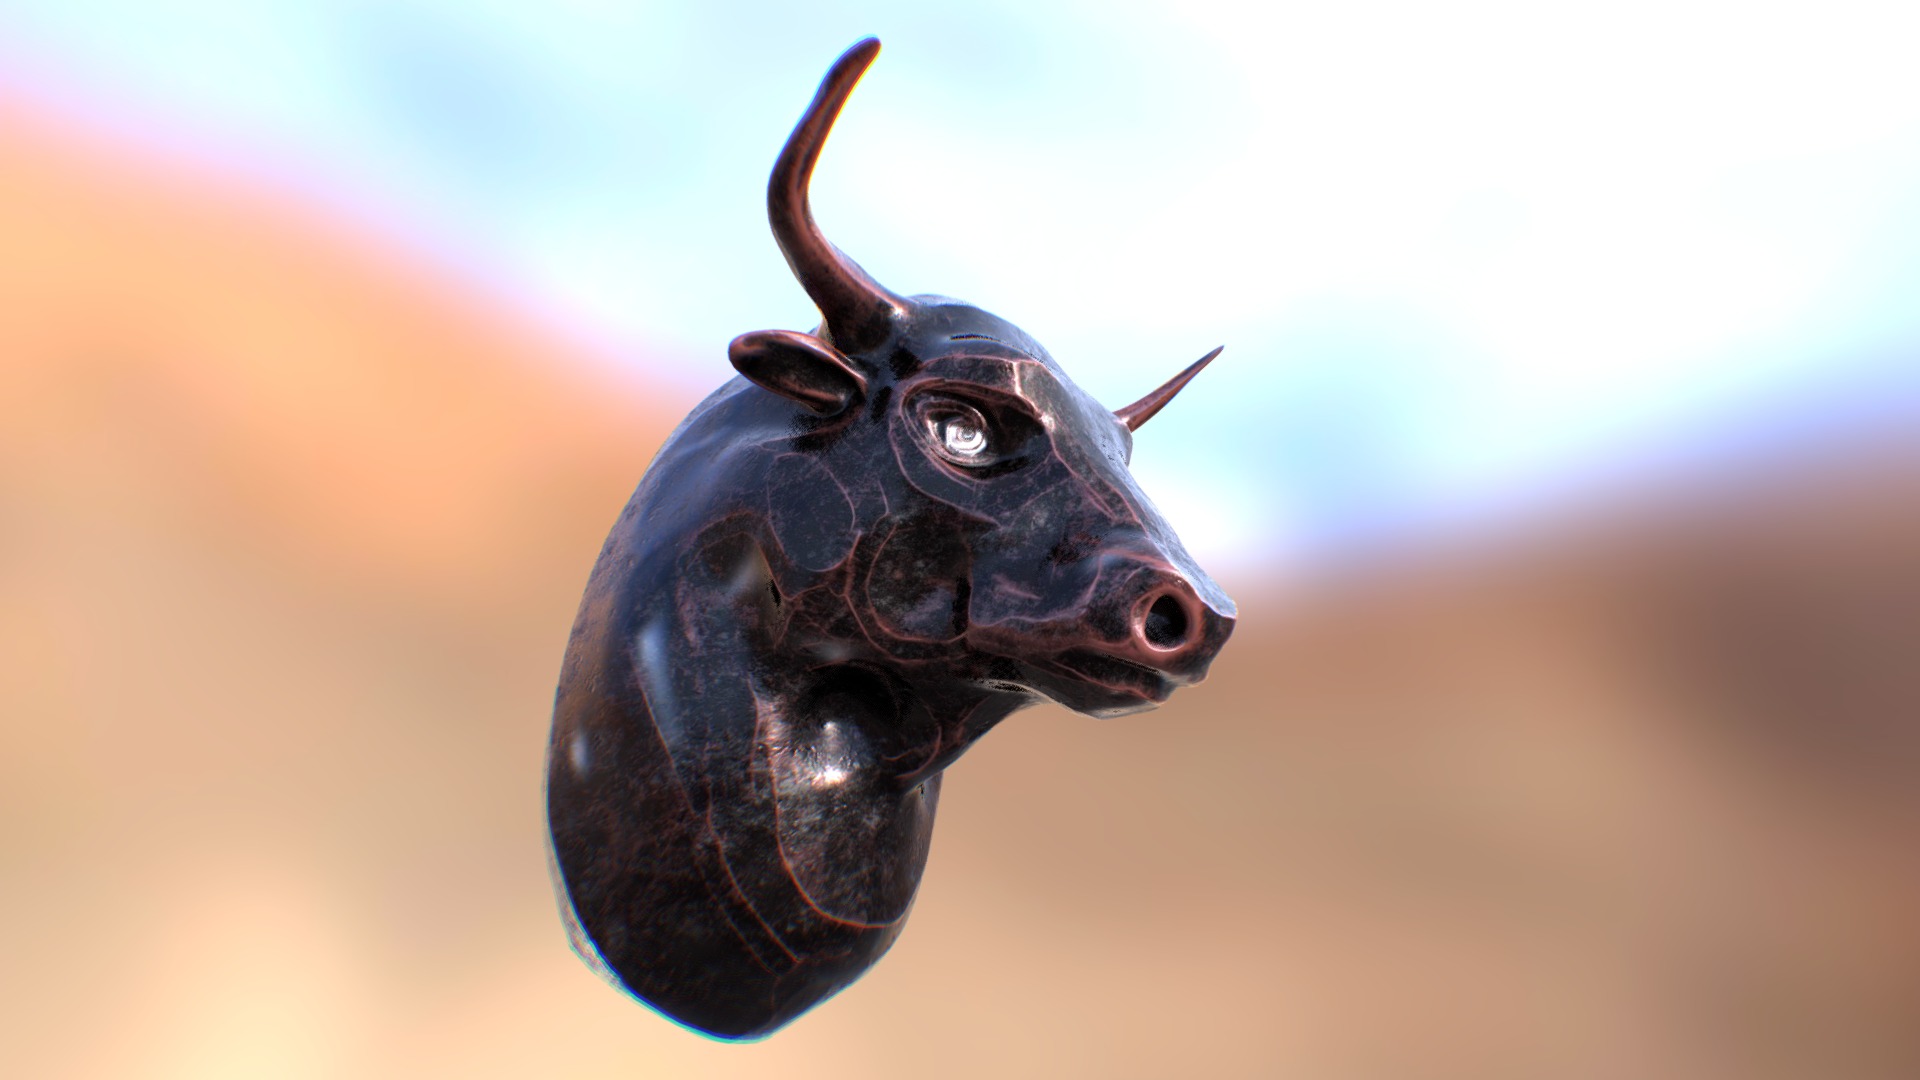 3D model animation studio, Cube Creative. - This is a 3D model of the animation studio, Cube Creative.. The 3D model is about a statue of a bull.